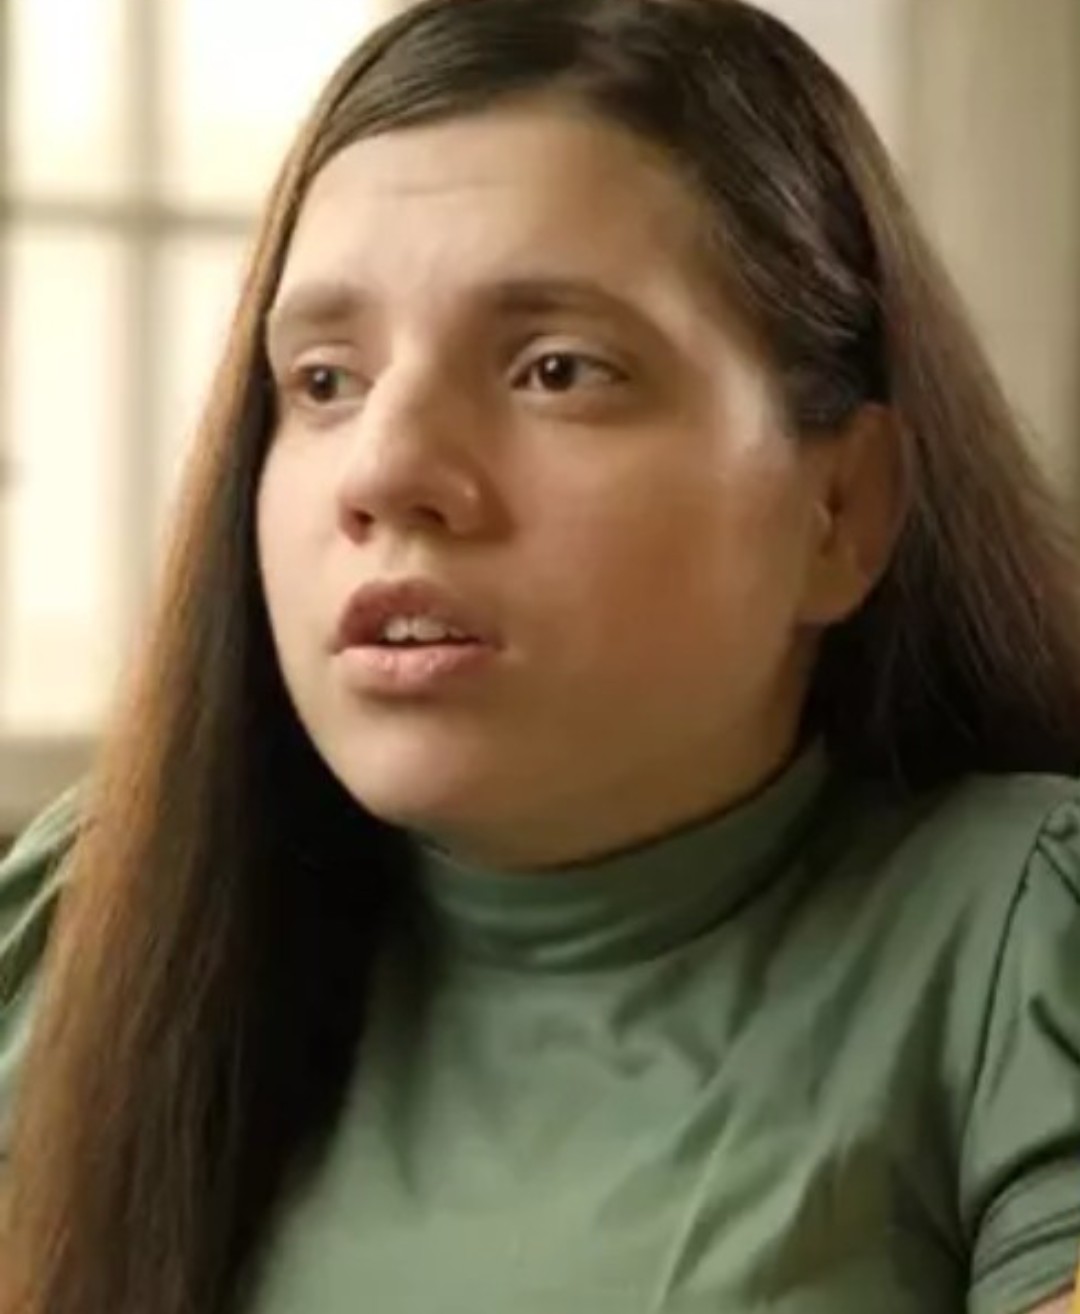 Woman with Dwarf Syndrome mistakenly adopted due to child's appearance 4